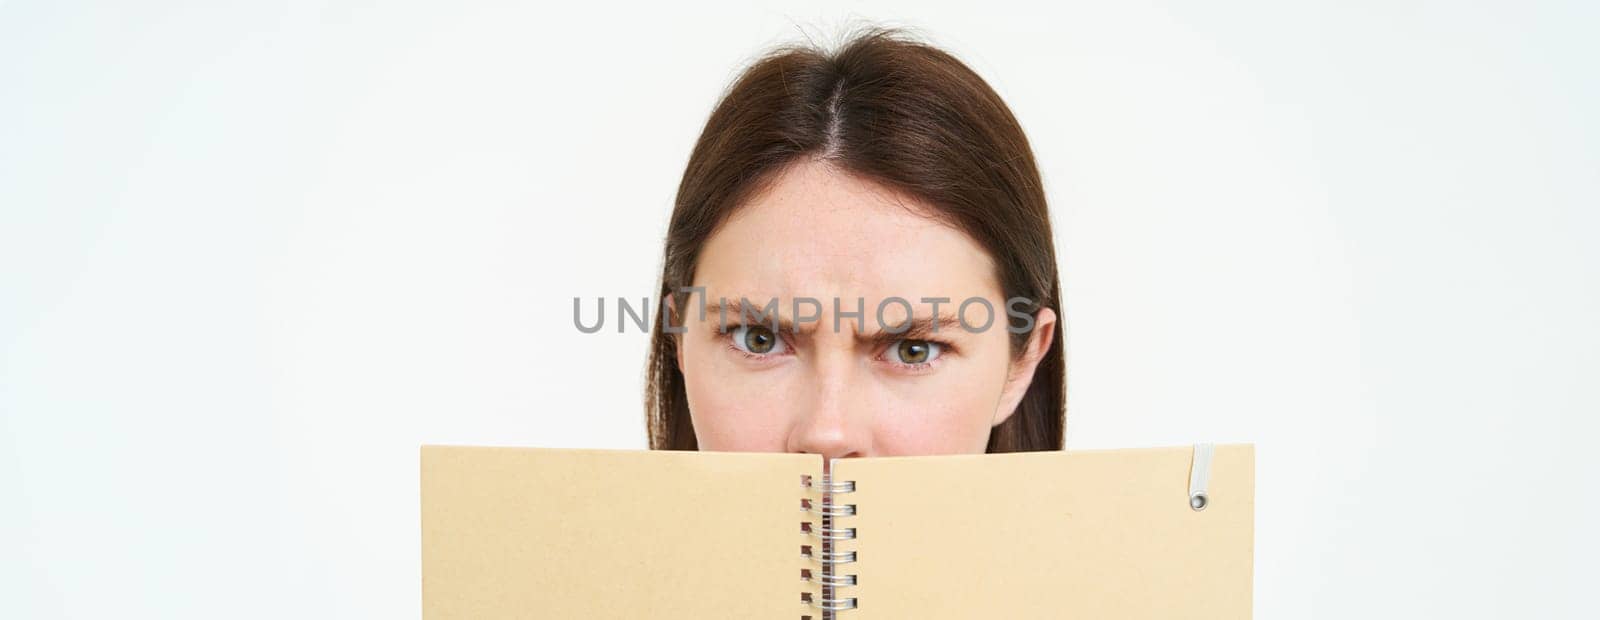 Woman with confused face looking at camera, frowning, holding notebook, reading planner or personal diary, standing over white background.